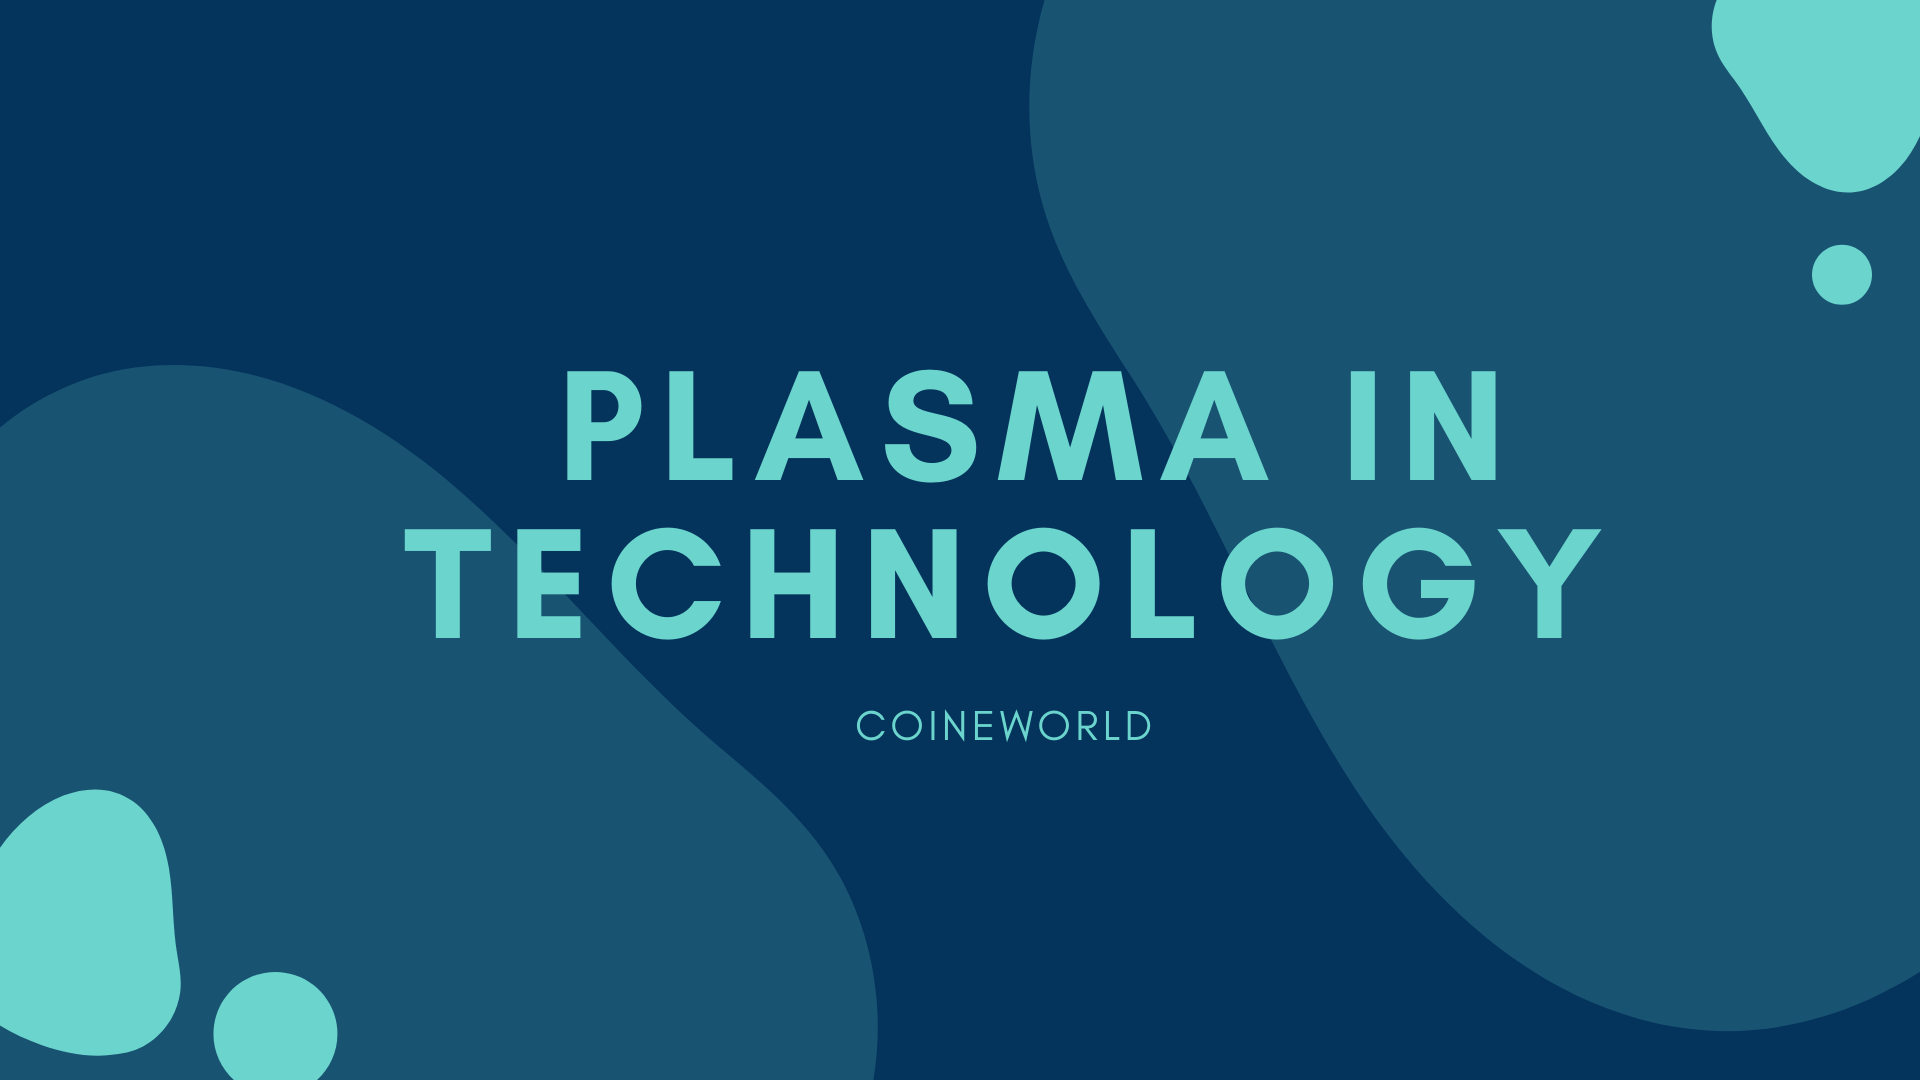 Which Can Be Categorized As The Use Of Plasma In Technology?